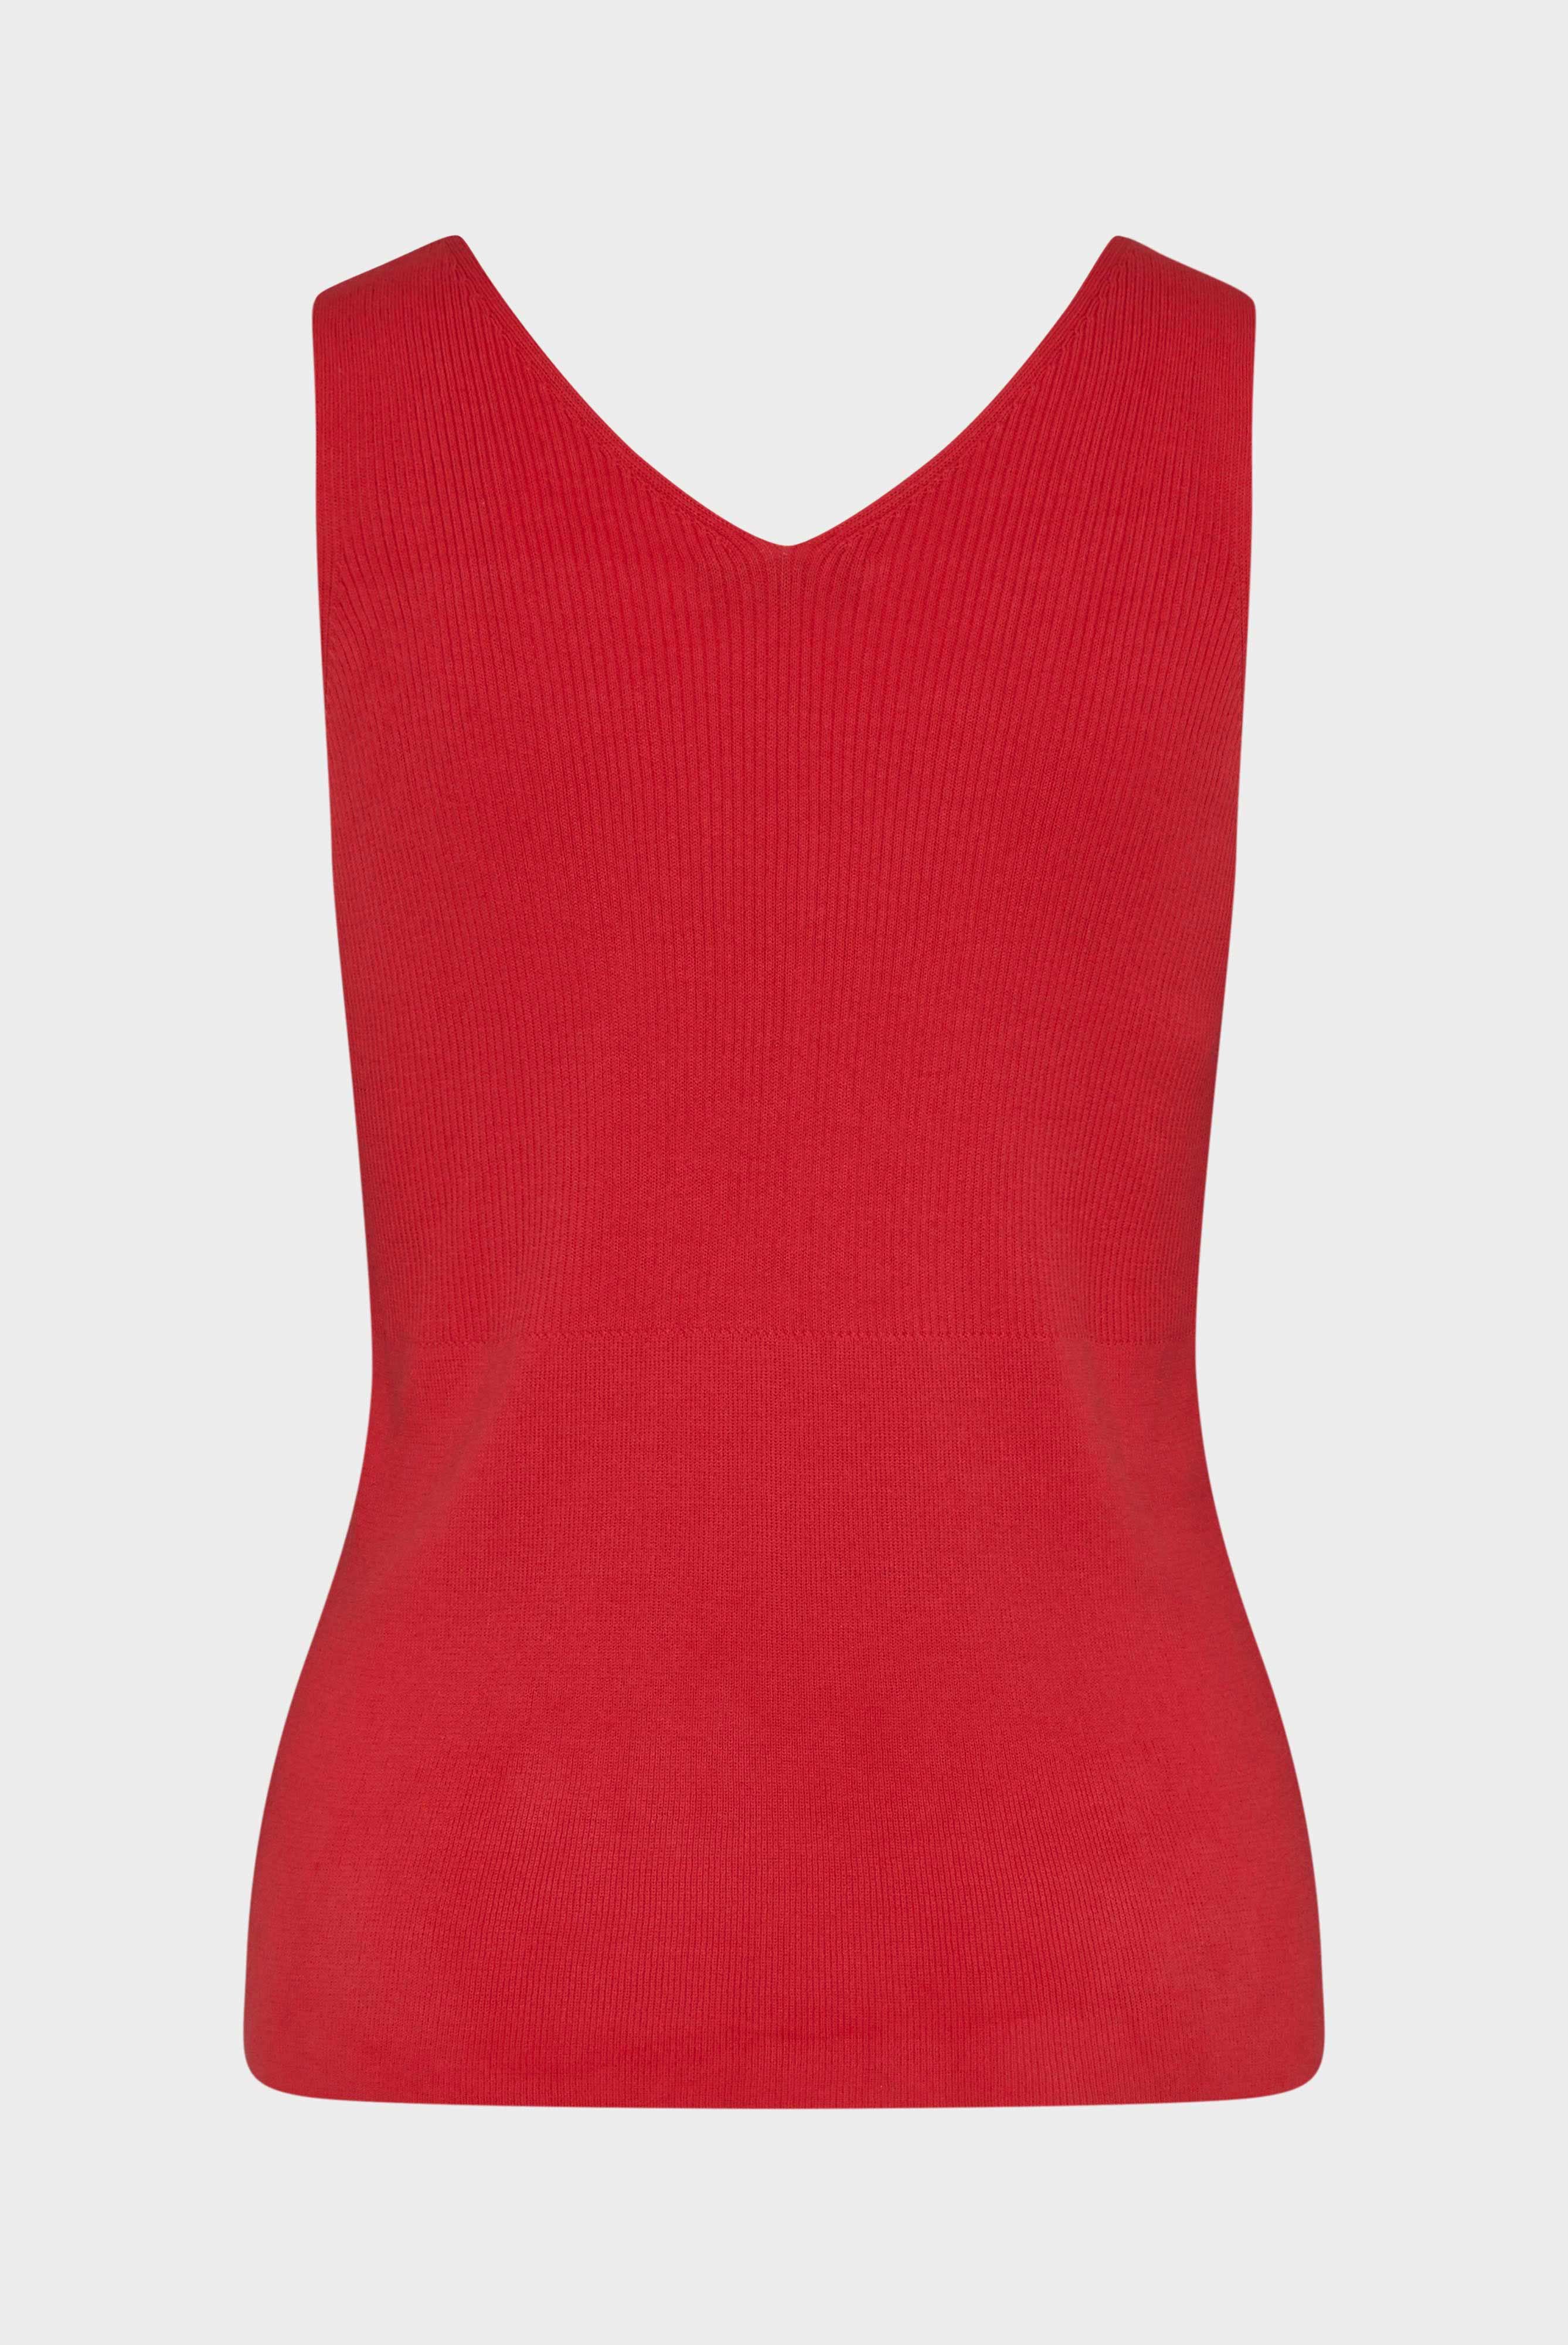 Tops & T-Shirts+Slim fit cotton tank top rot/rose+09.9966..S00192.540.S